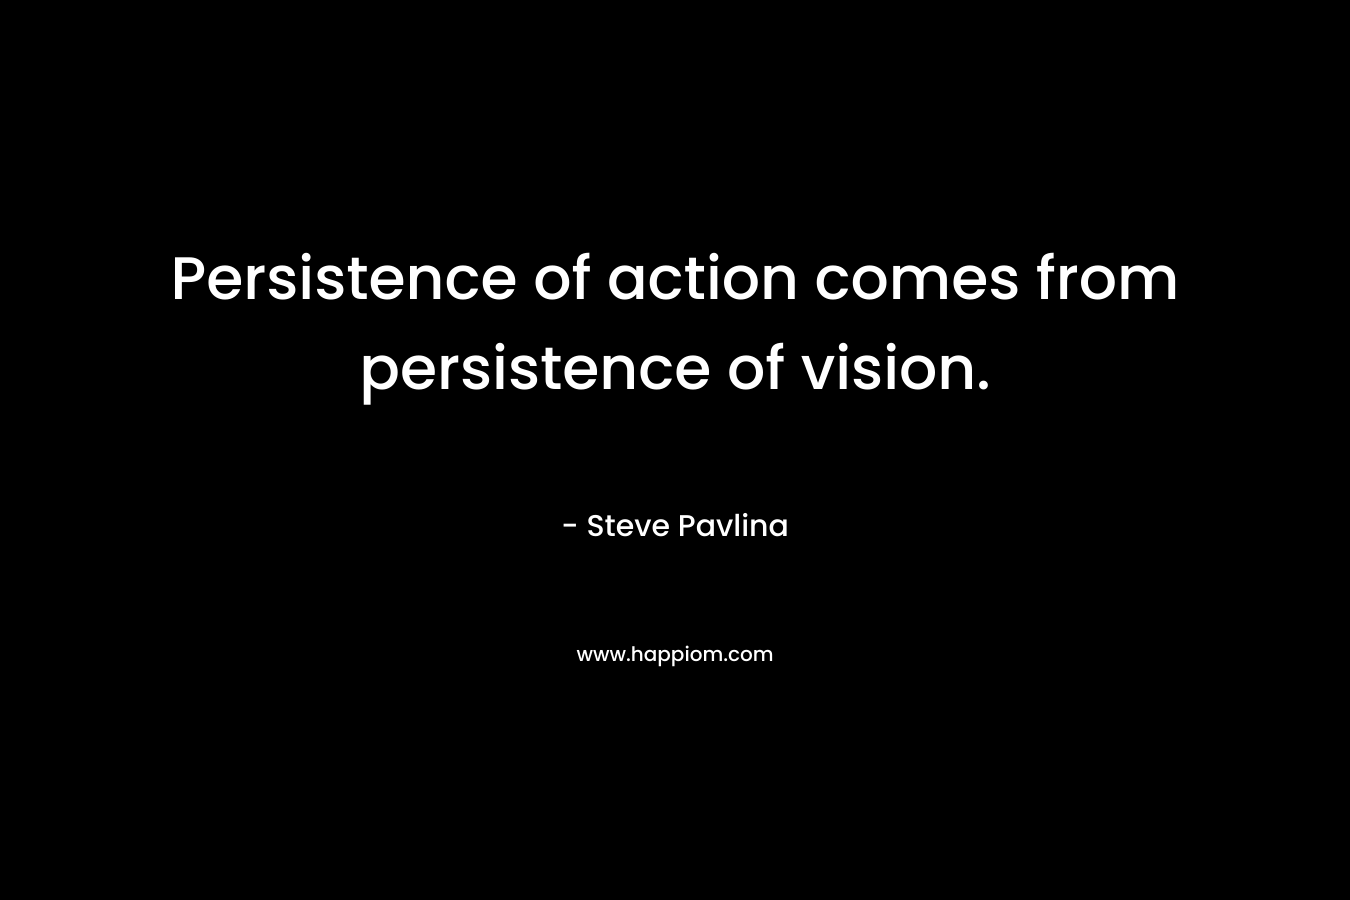 Persistence of action comes from persistence of vision.